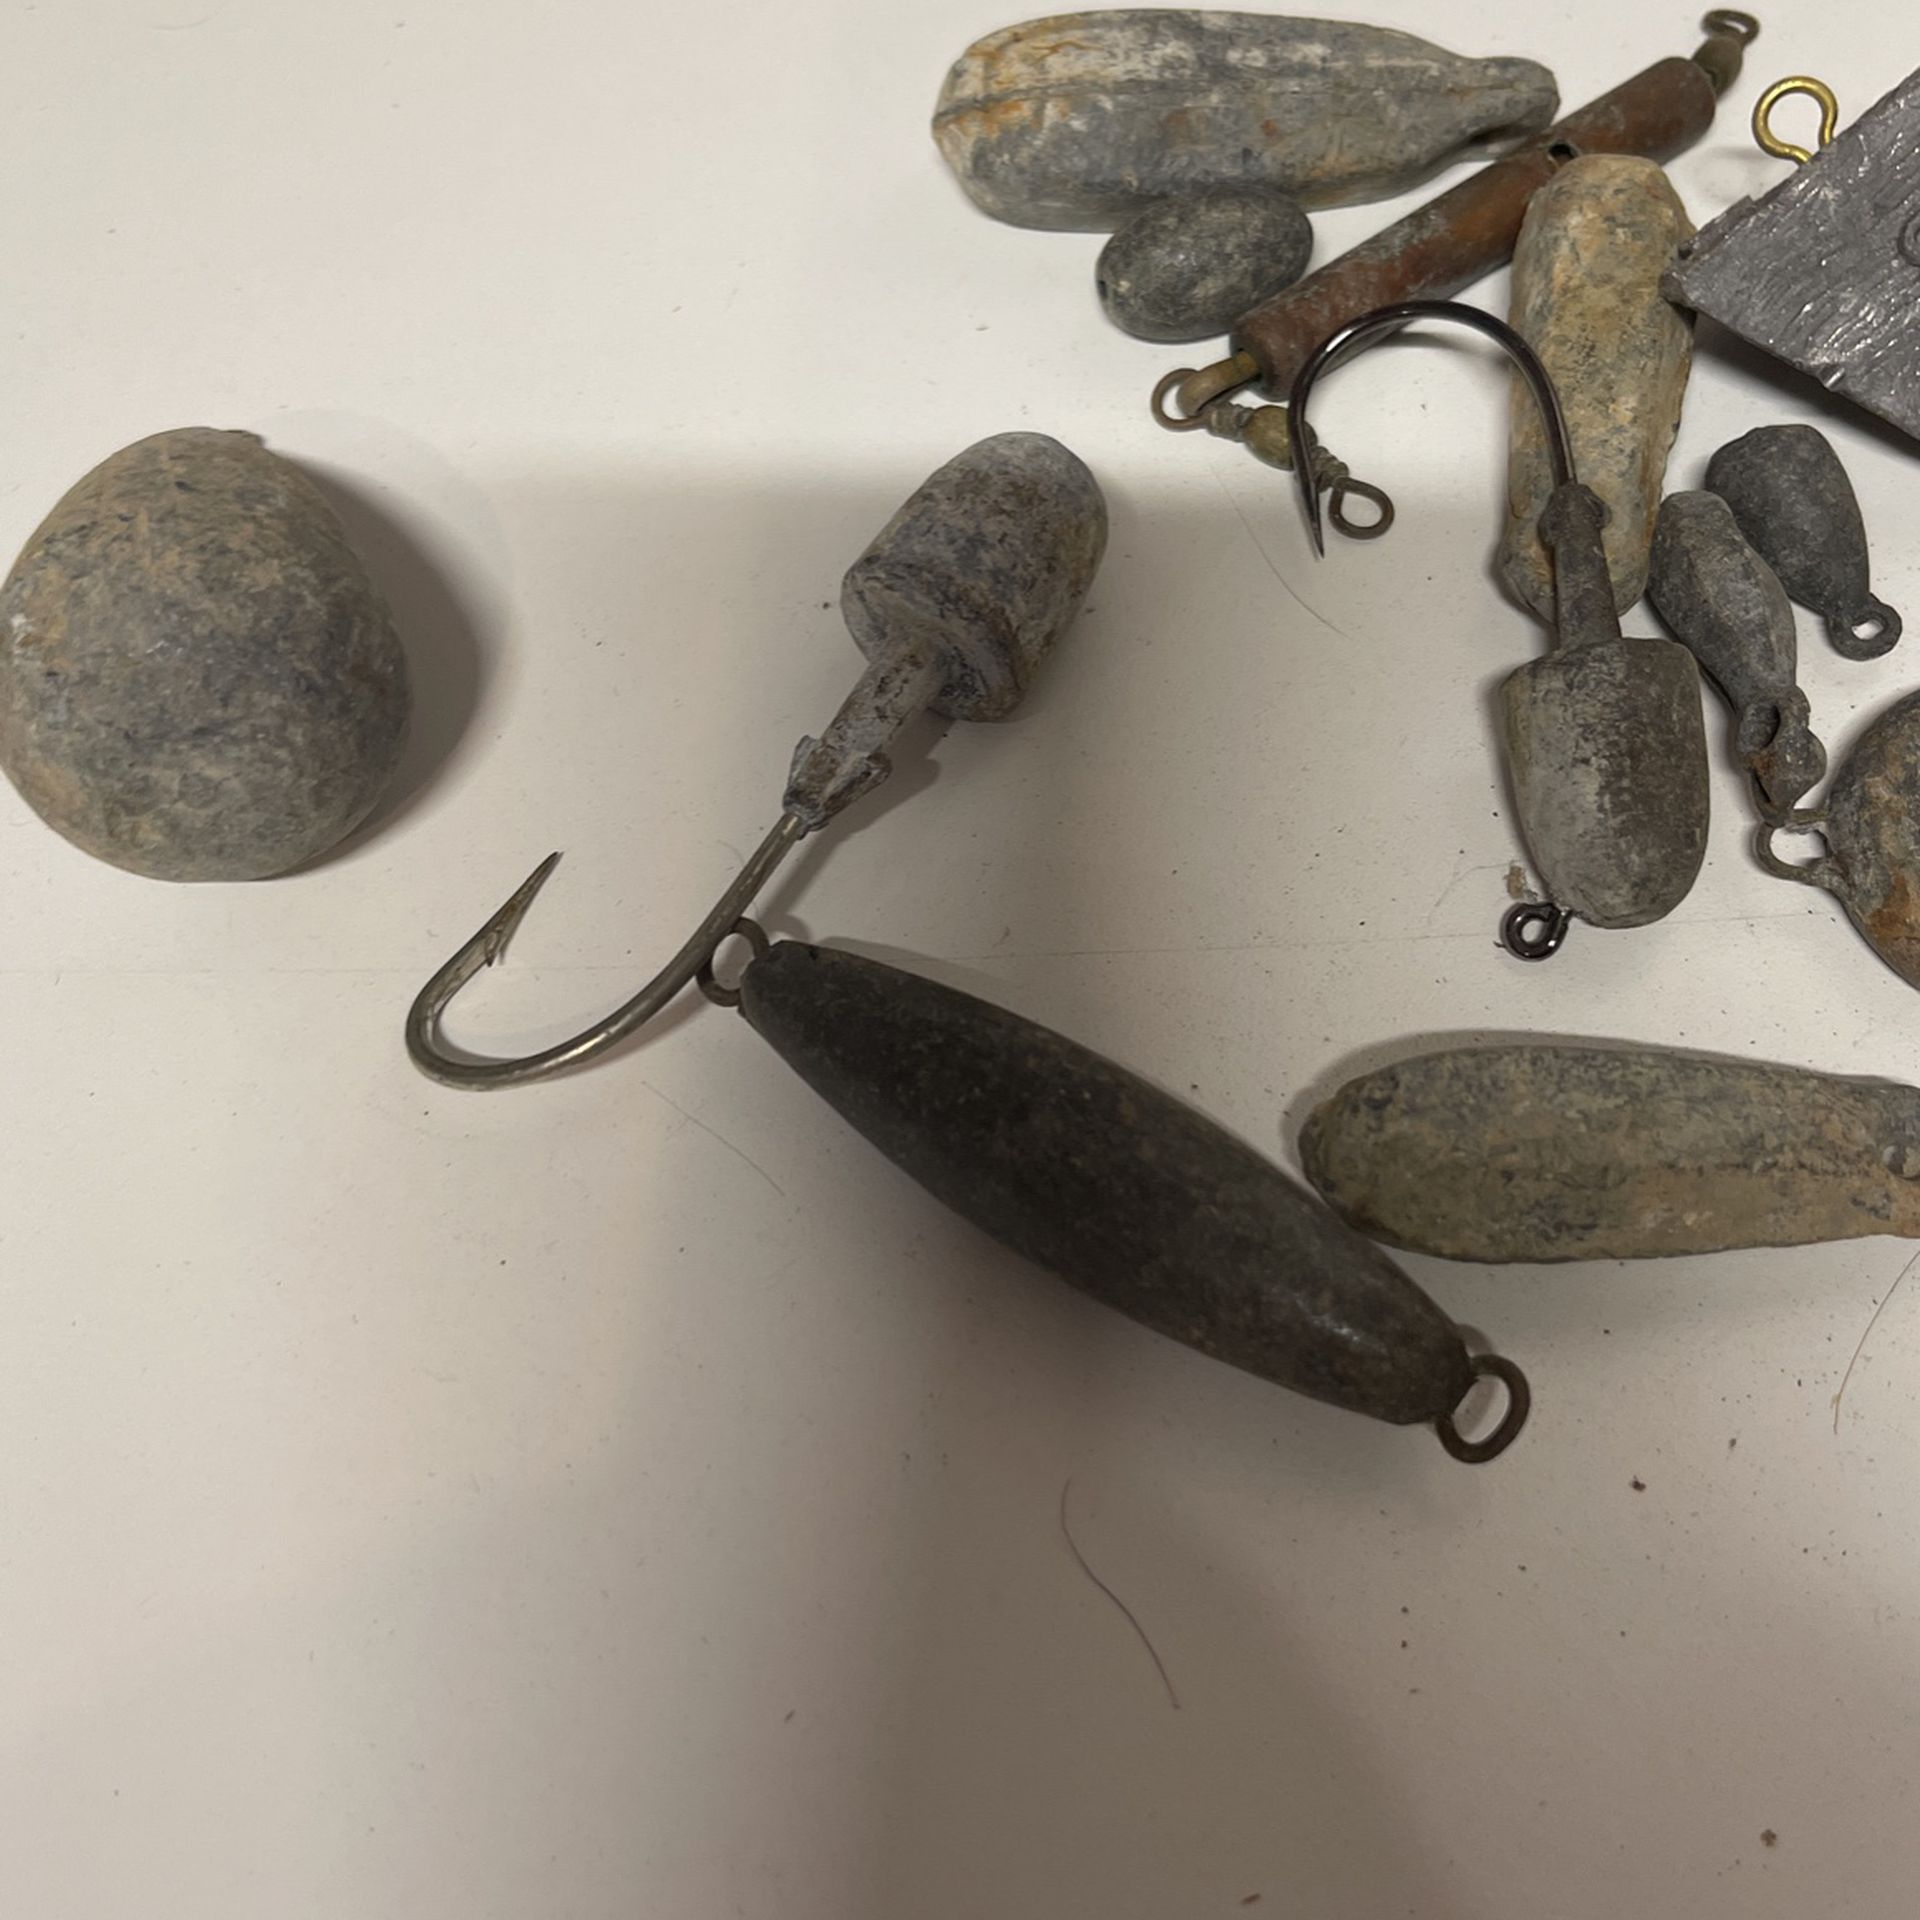 Vintage Fishing Sinkers 15 for Sale in Dixon, CA - OfferUp